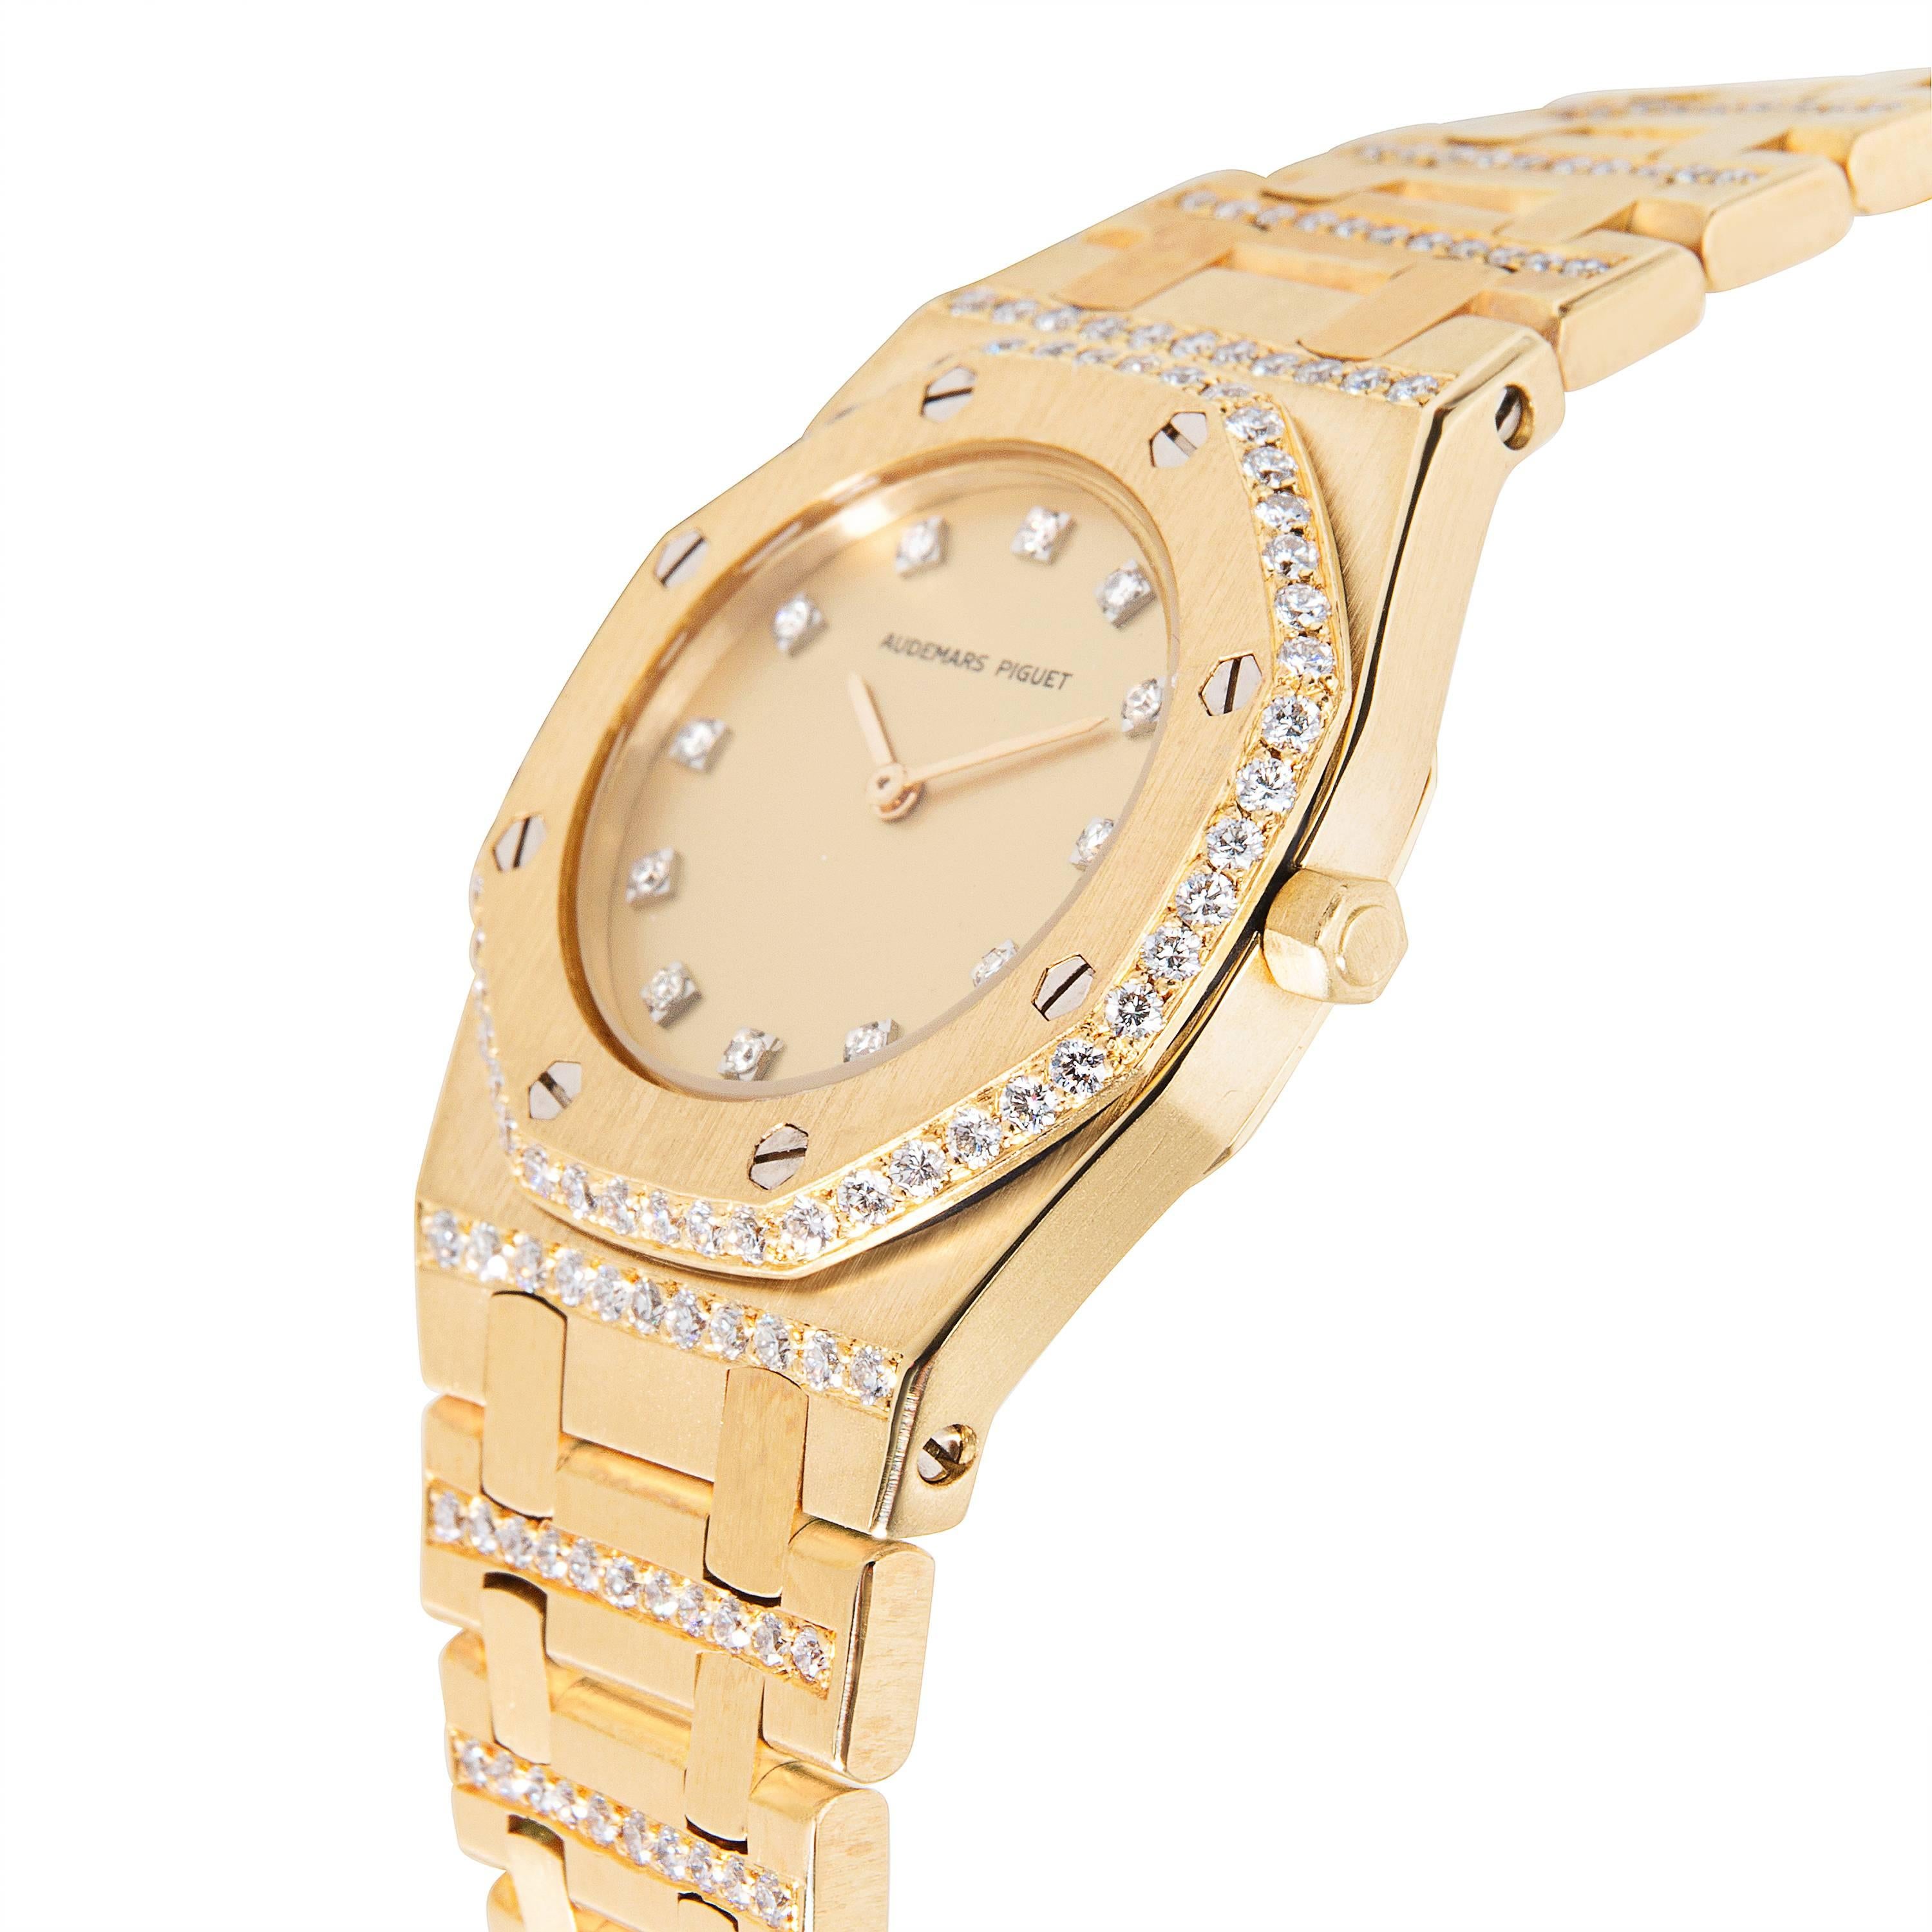 Audemars Piguet Royal Oak Ladies Watch in 18K Yellow Gold

This Audemars Piguet Royal Oak is a unique and eye catching timepiece of the 1980s. It features 2.35 carats of high quality diamonds, D-F in color and VS in clarity. The diamonds are factory